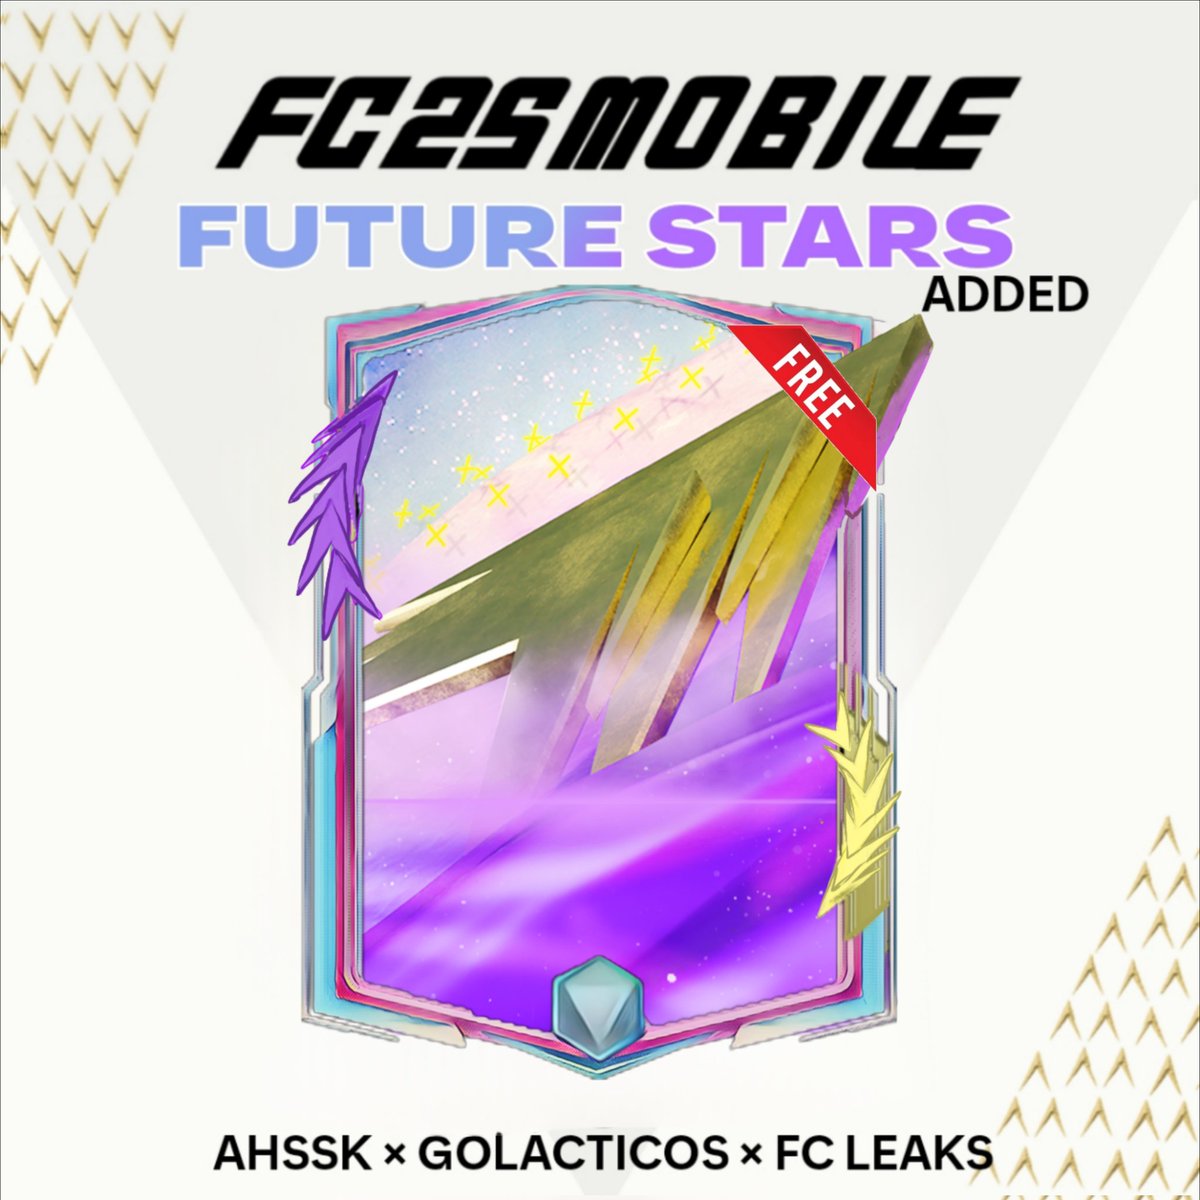 THE #FUTURESTARS CARD IS NOW AVAILABLE IN YOU DRIVE (FREE) NO WATERMARK!

FREE TO USE JUST MAKE SURE TO TAG ME 🙂

FOLLOW @ahssk_fcm ,@GOLACTICOS_ ,@EA_FCLEAKS FOR MORE UPDATES

I WILL TRY TO IMPROVE THR QUALITY AS MUCH AS POSSIBLE 🙏🏻

Link : in thread 

@slash__fc